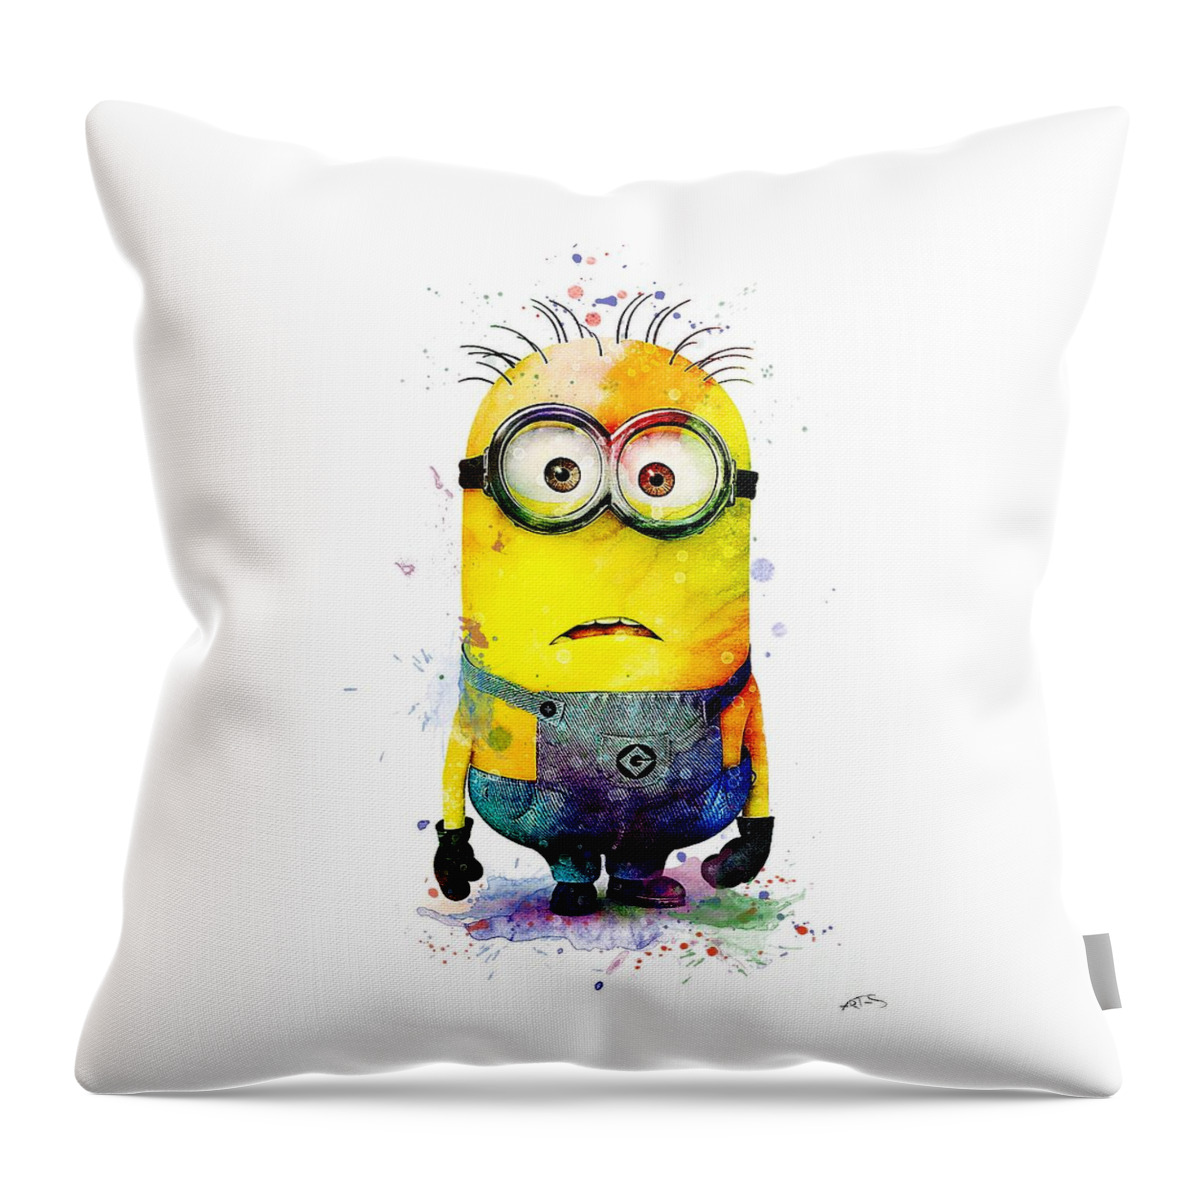 Watercolor Print Throw Pillow featuring the digital art Surprised Minion Watercolor Artwork by White Lotus